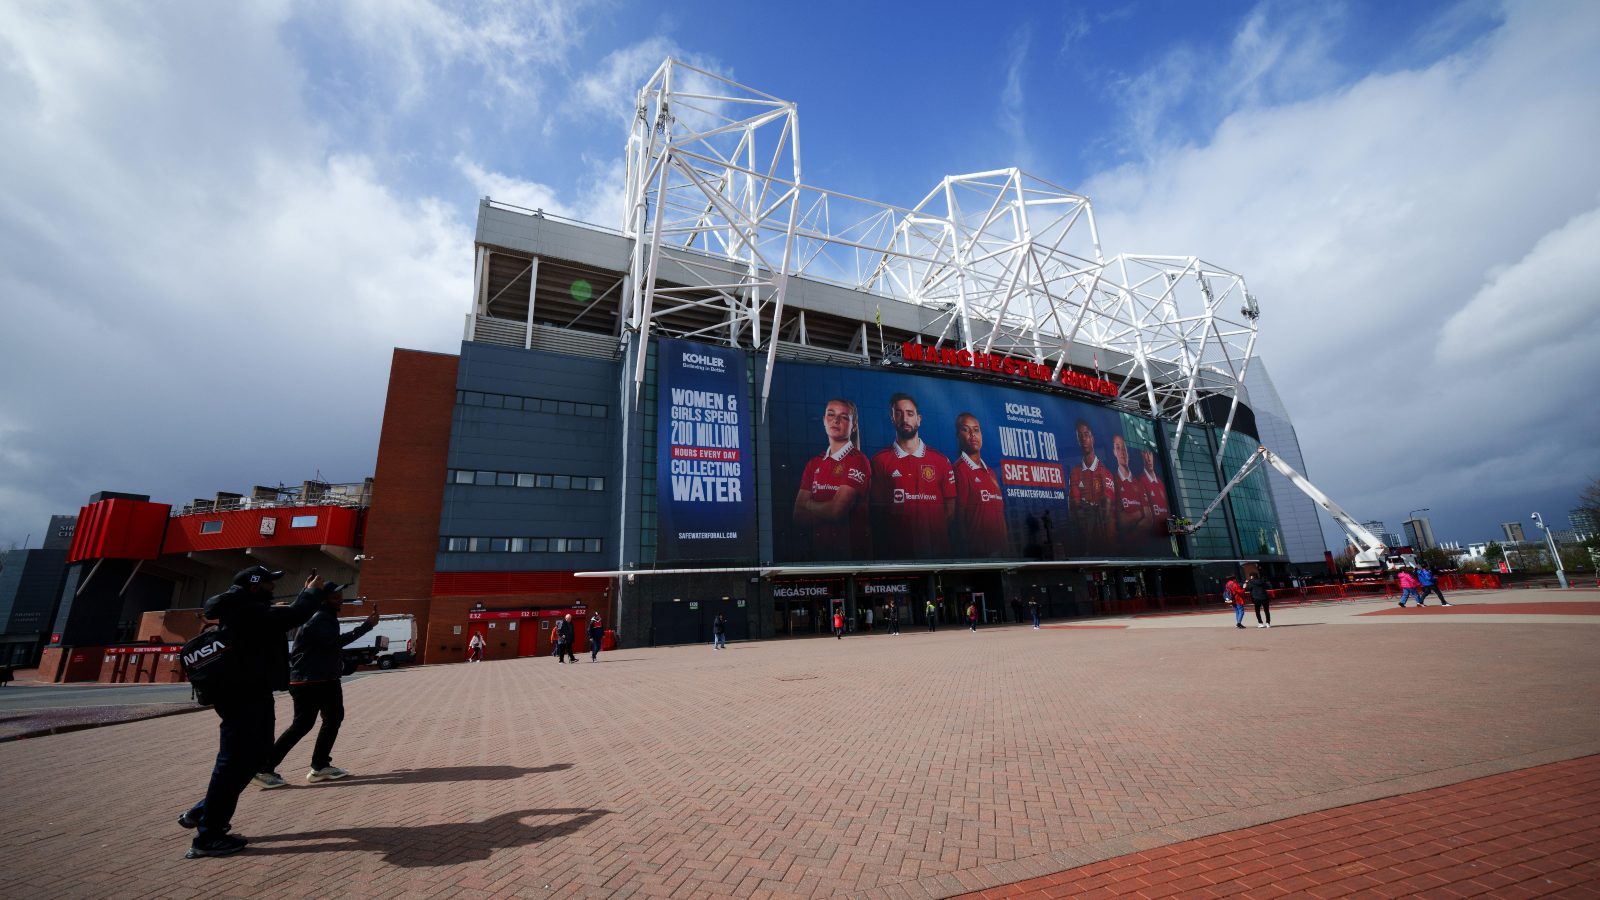 Outside Manchester United's stadium, Old Trafford